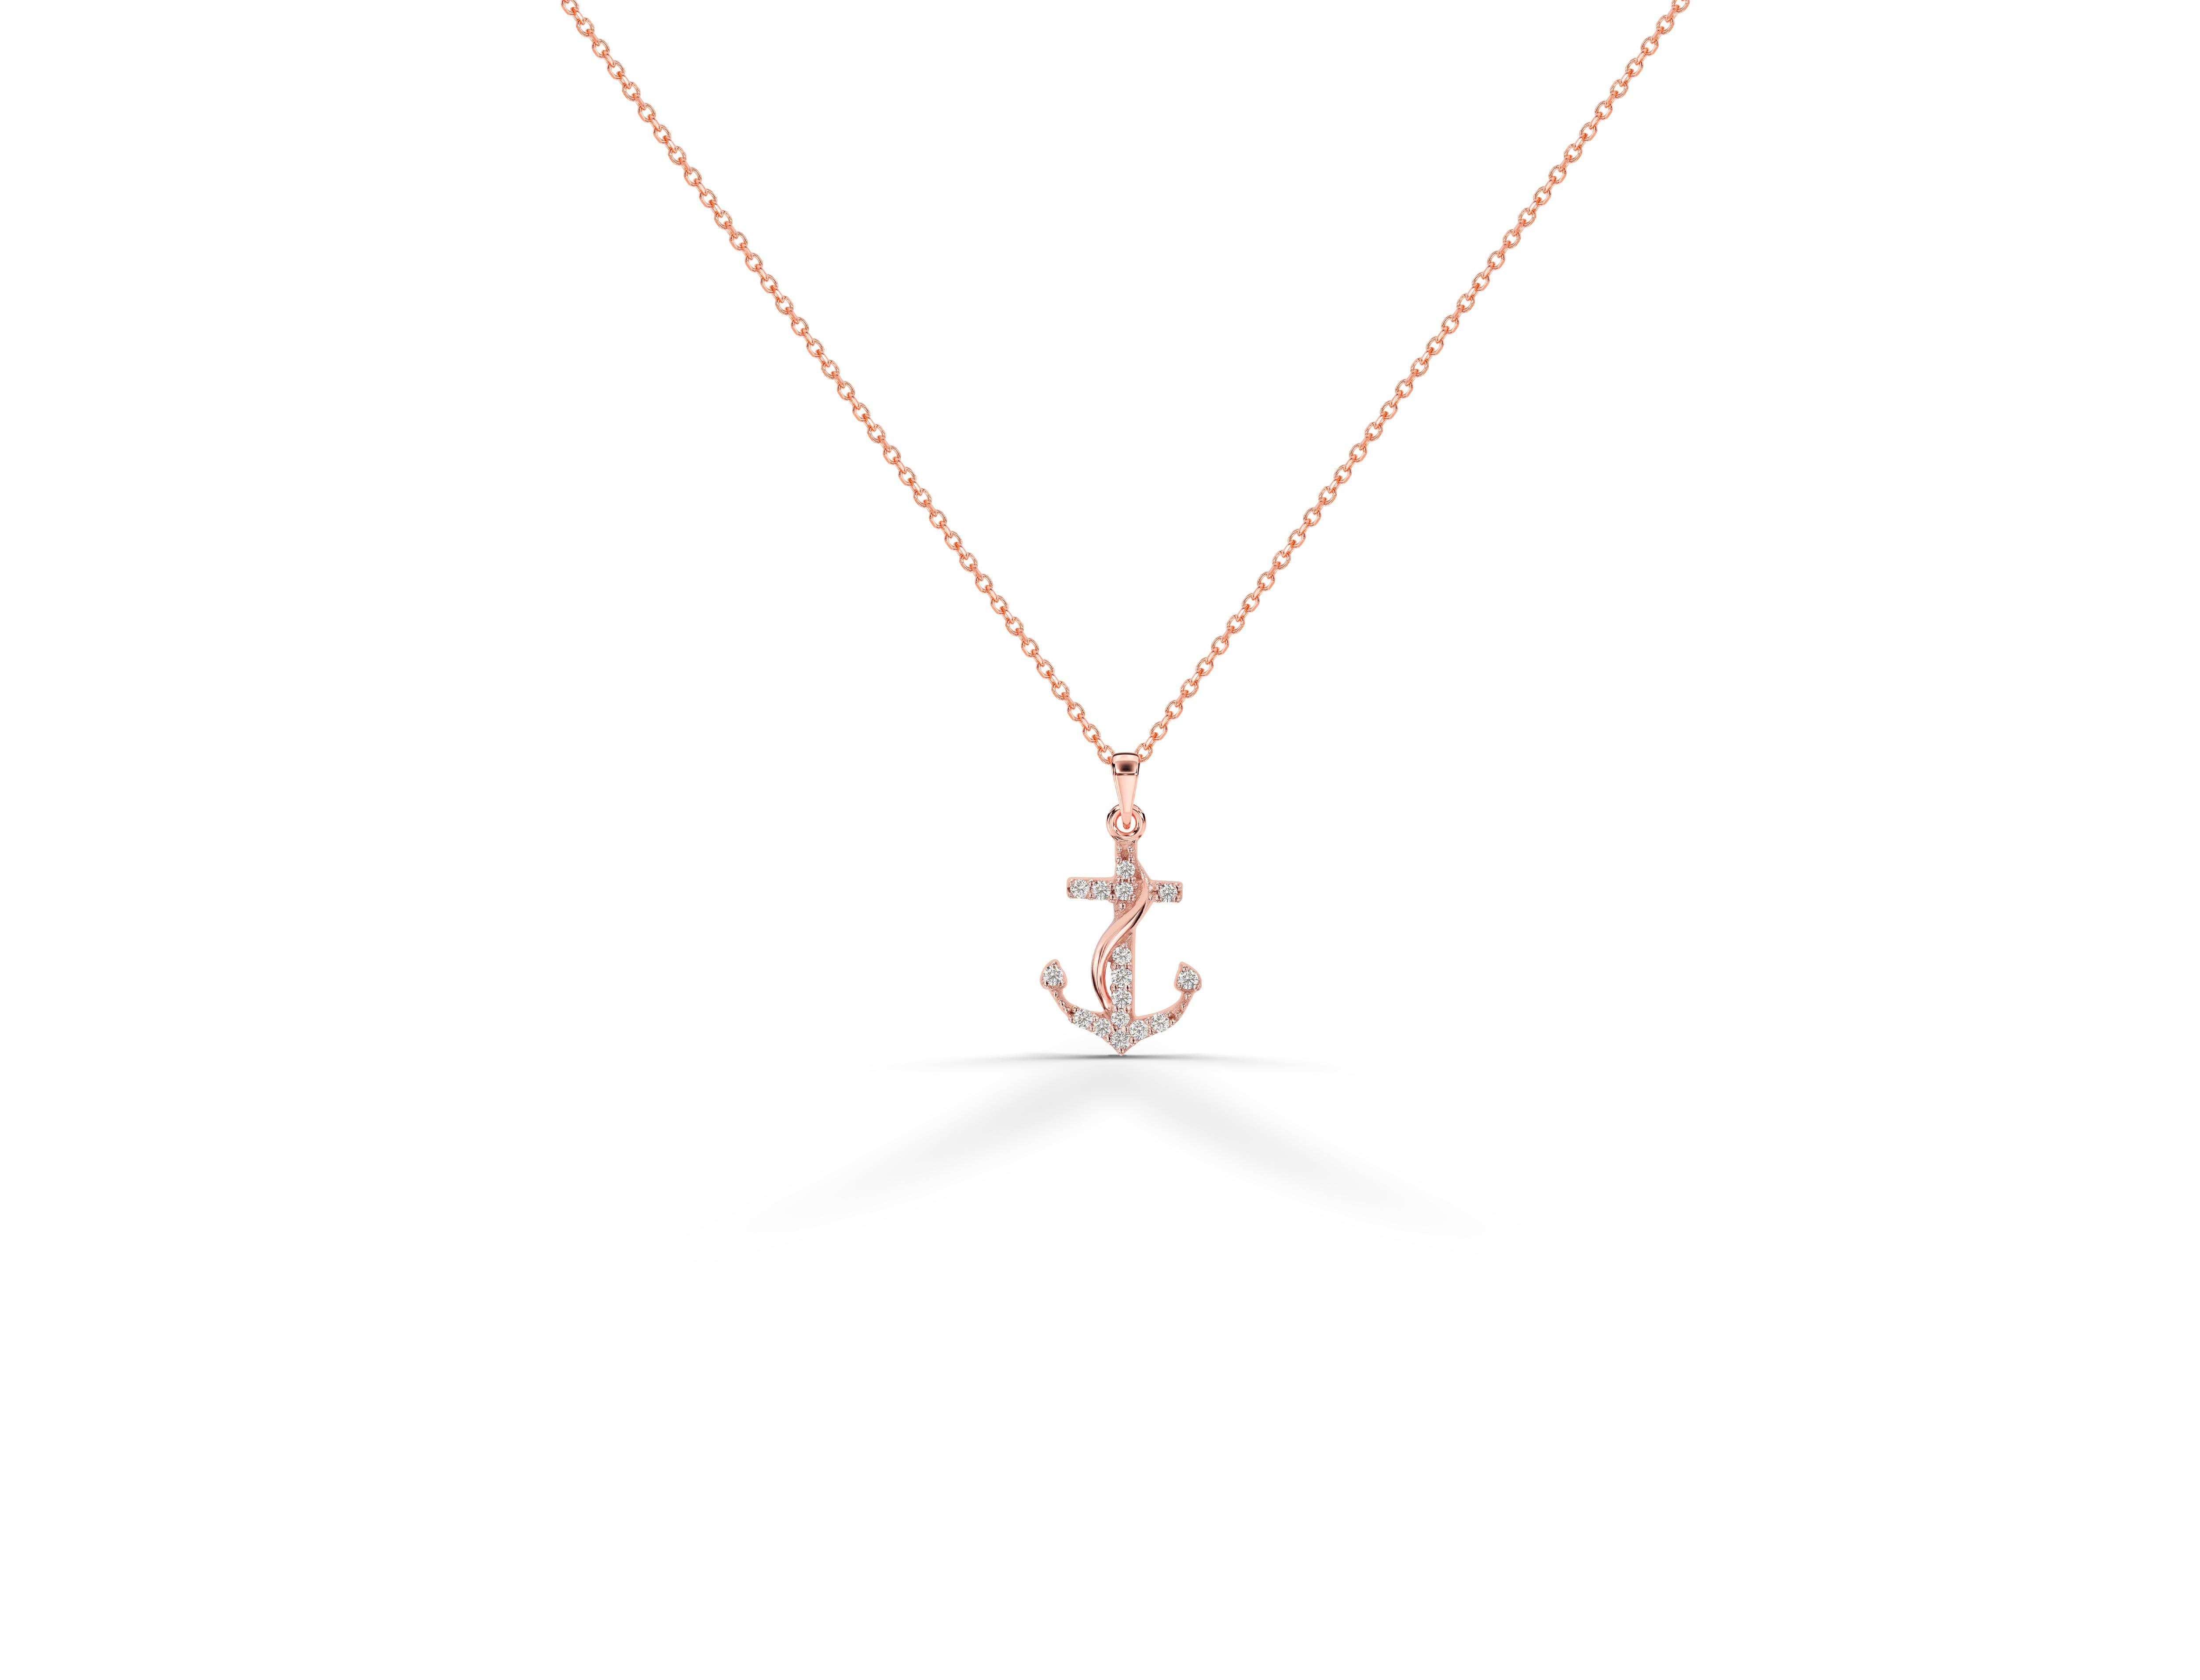 Diamond Anchor Necklace made of 14k solid gold available in two colors (White Gold + Rose Gold), (White Gold + Yellow Gold).

Natural genuine round cut diamond each diamond is hand selected by me to ensure quality and set by a master setter in our